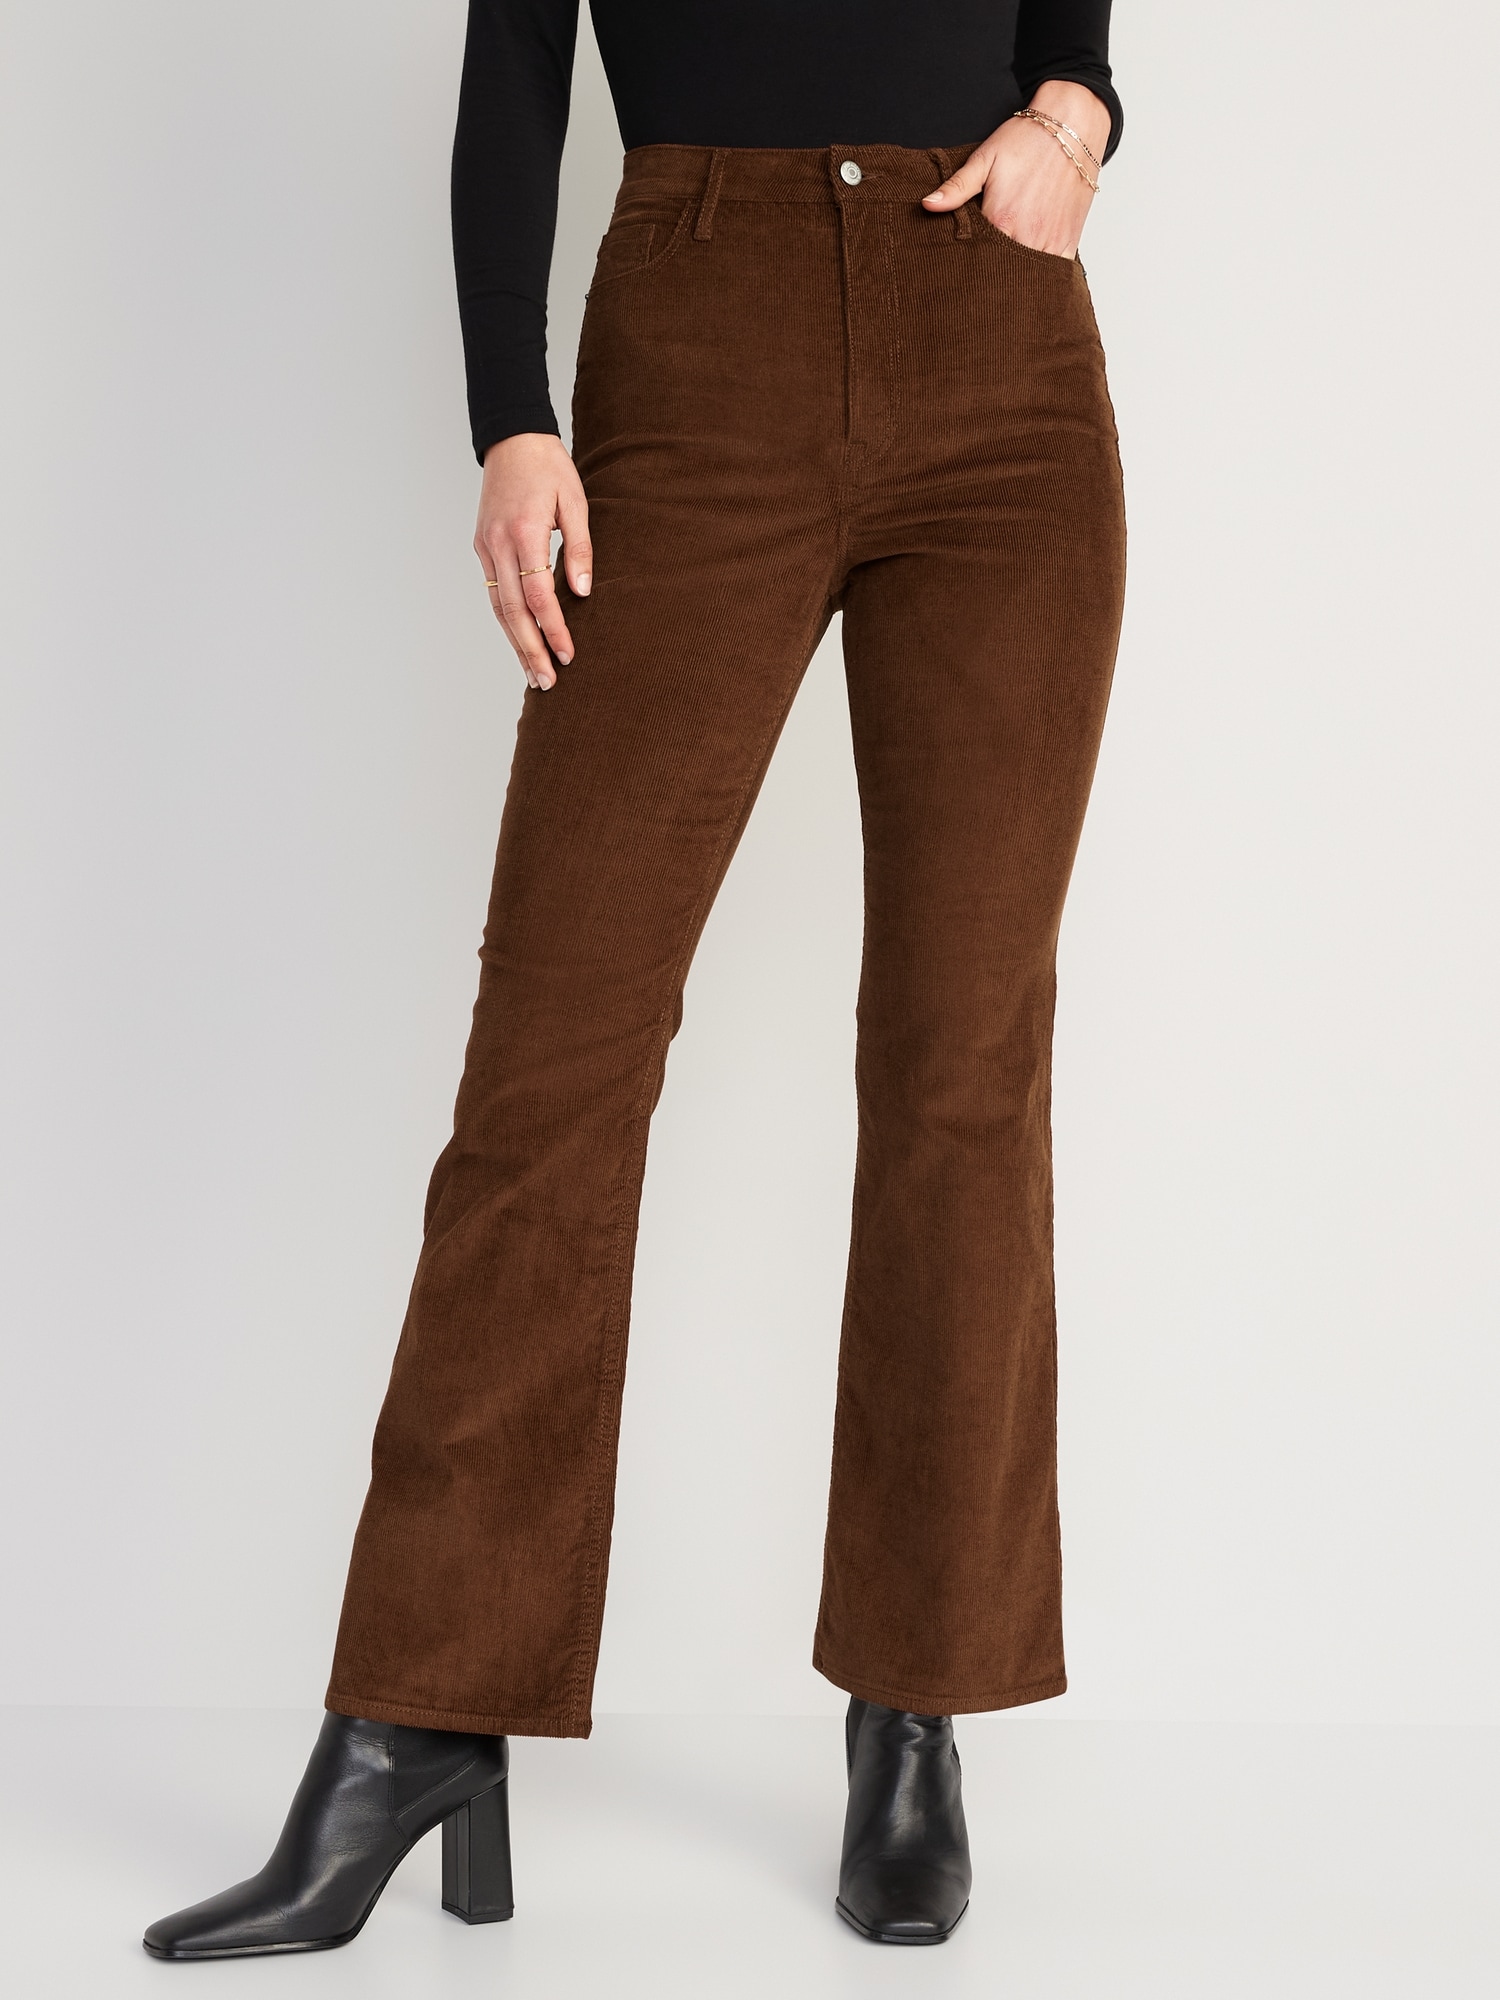 Old Navy Higher High-Waisted Flare Corduroy Pants for Women brown. 1